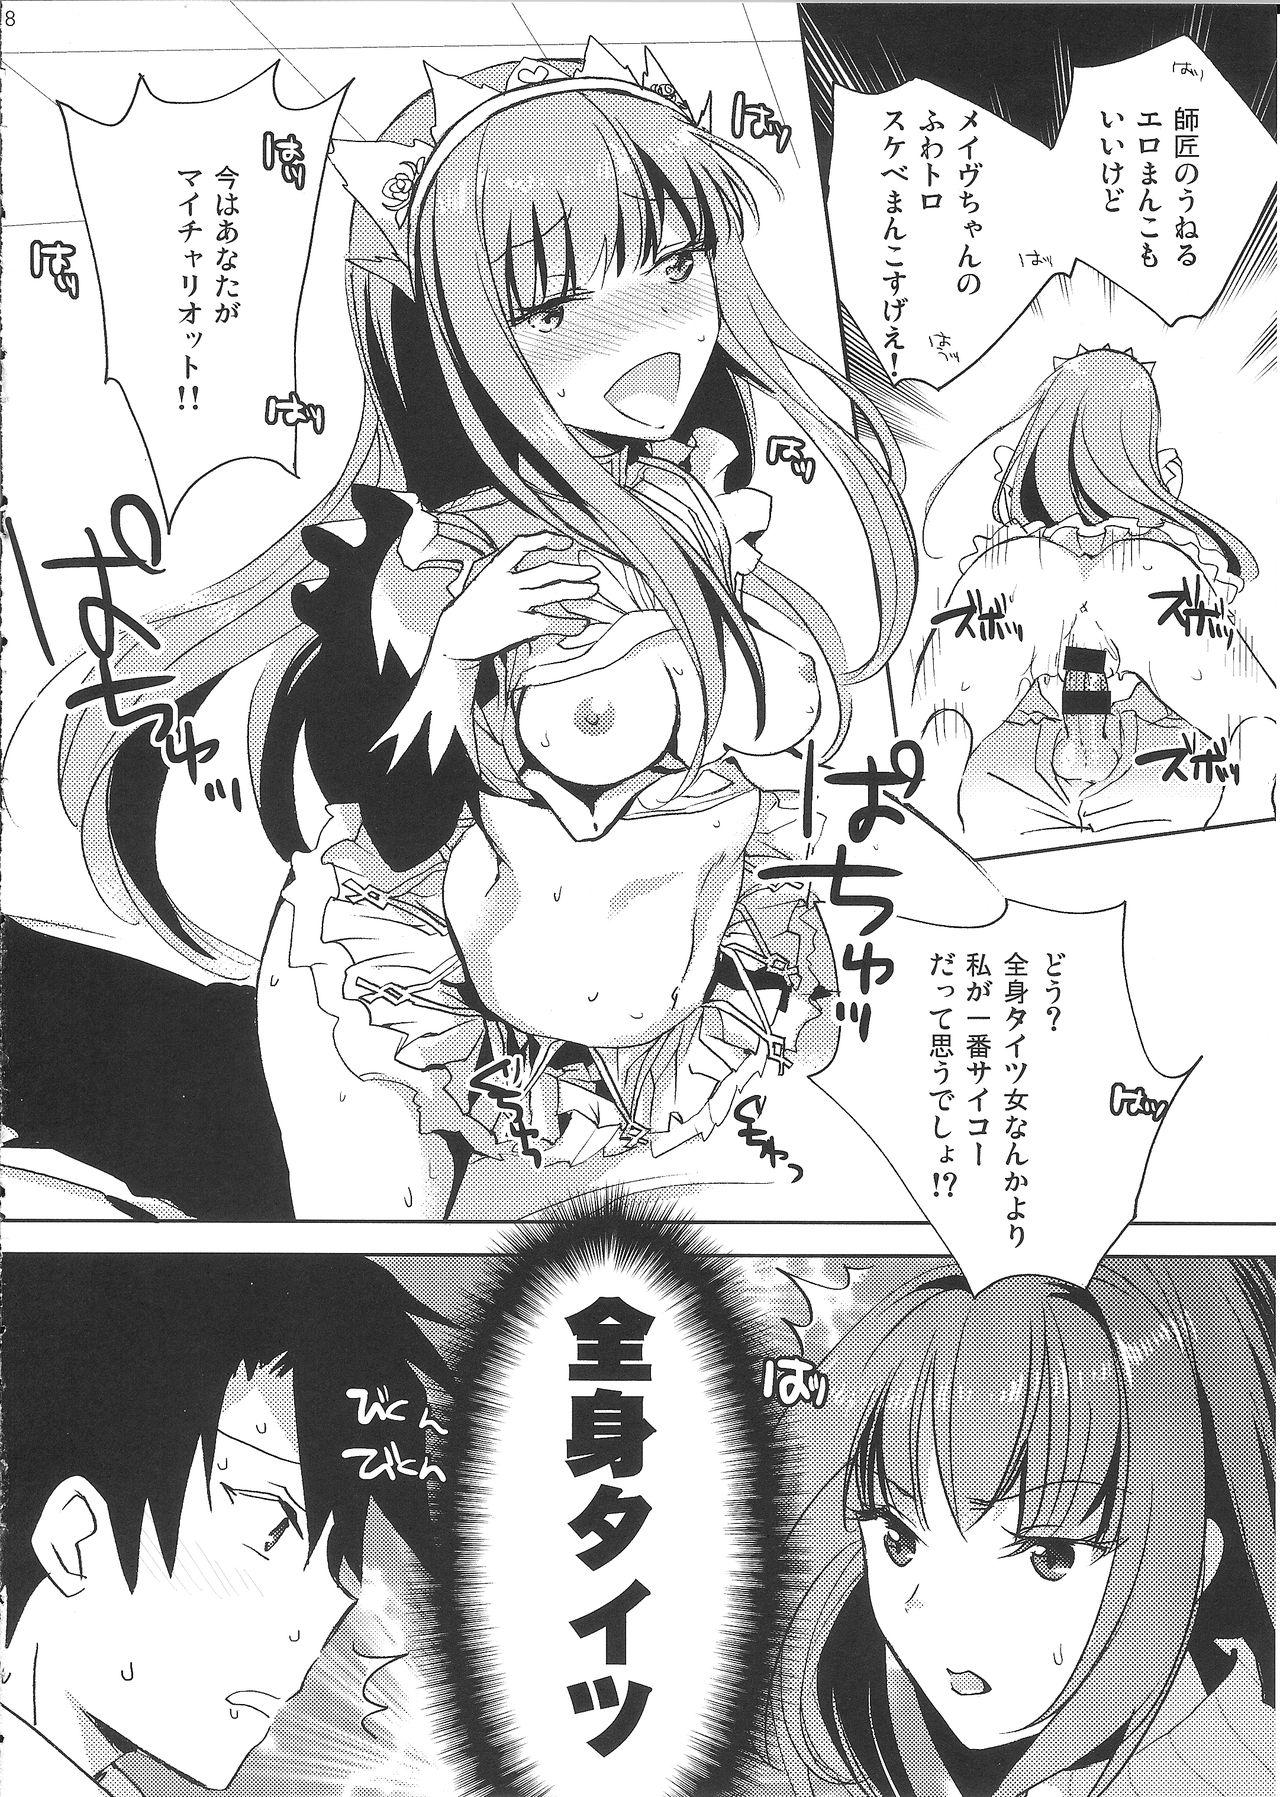 American BLACK EDITION 2 - Fate grand order Amature Sex - Page 6